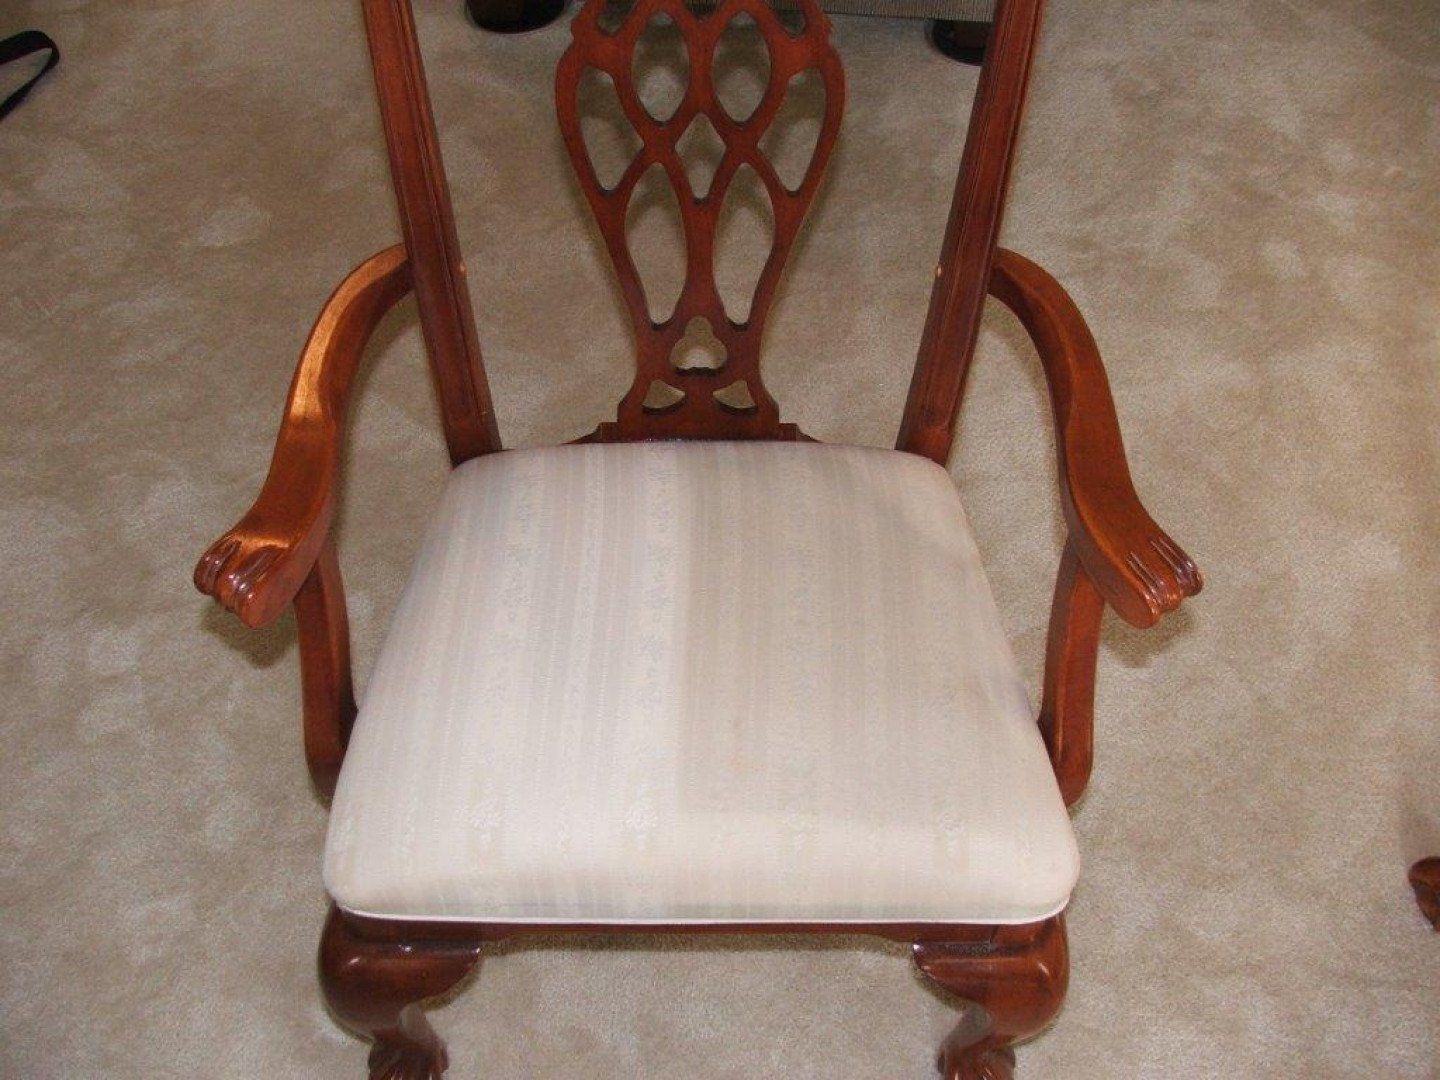 Upholstery cleaning chair